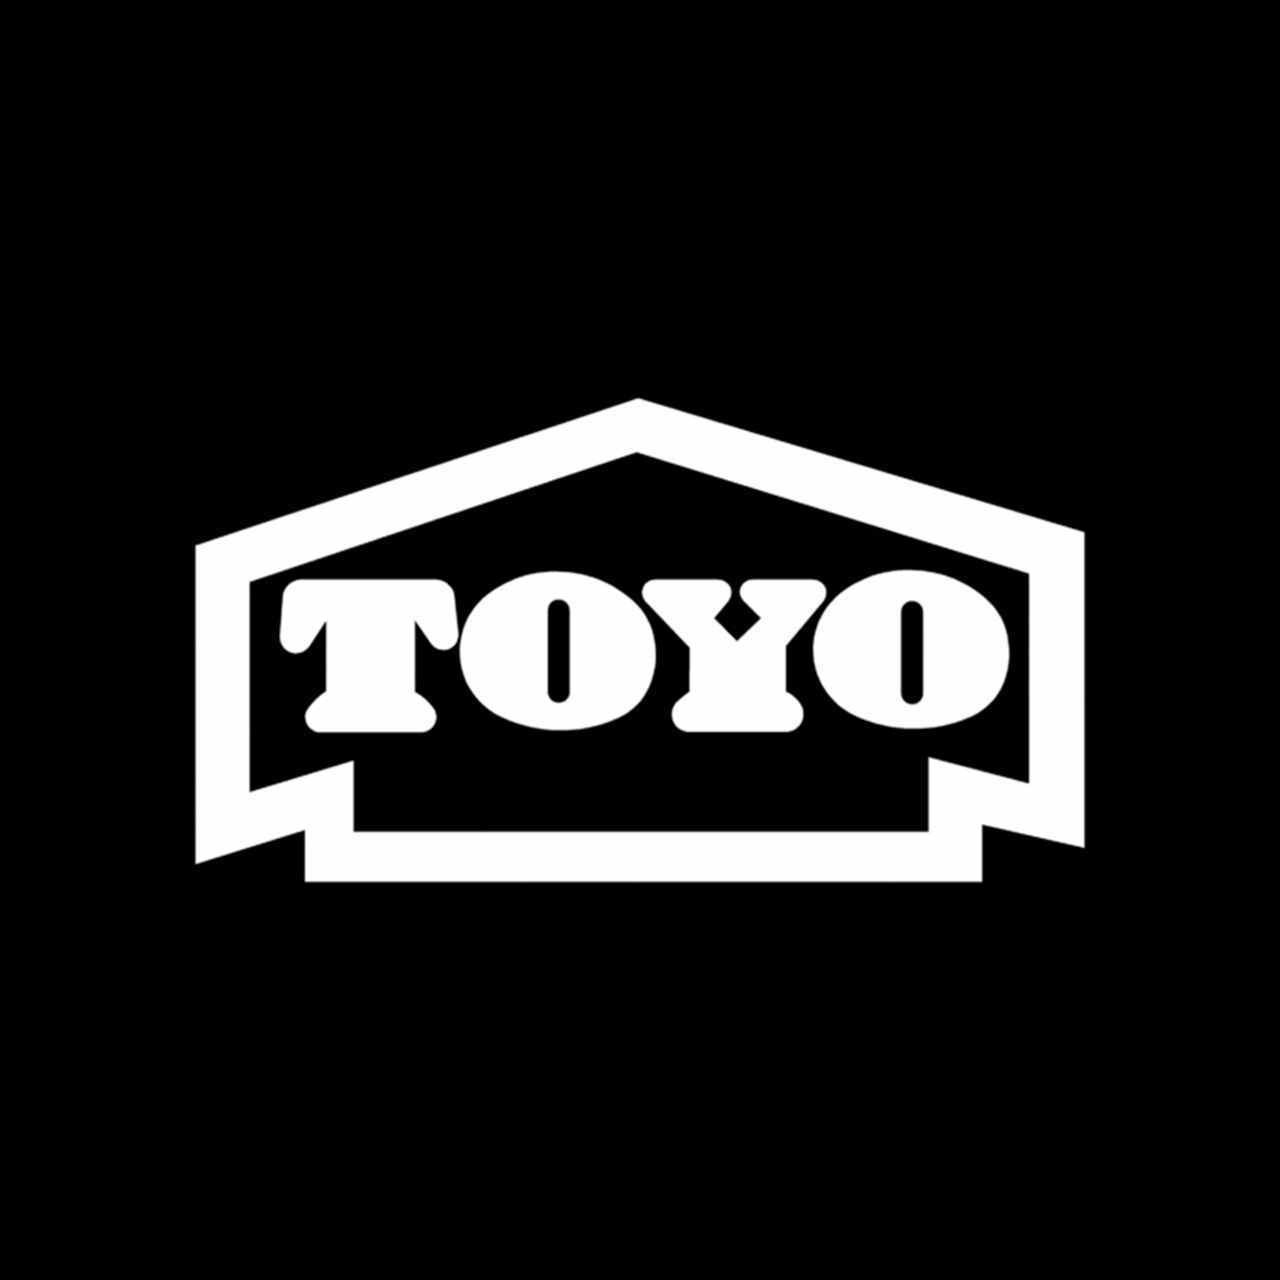 Toyo Tires Decal